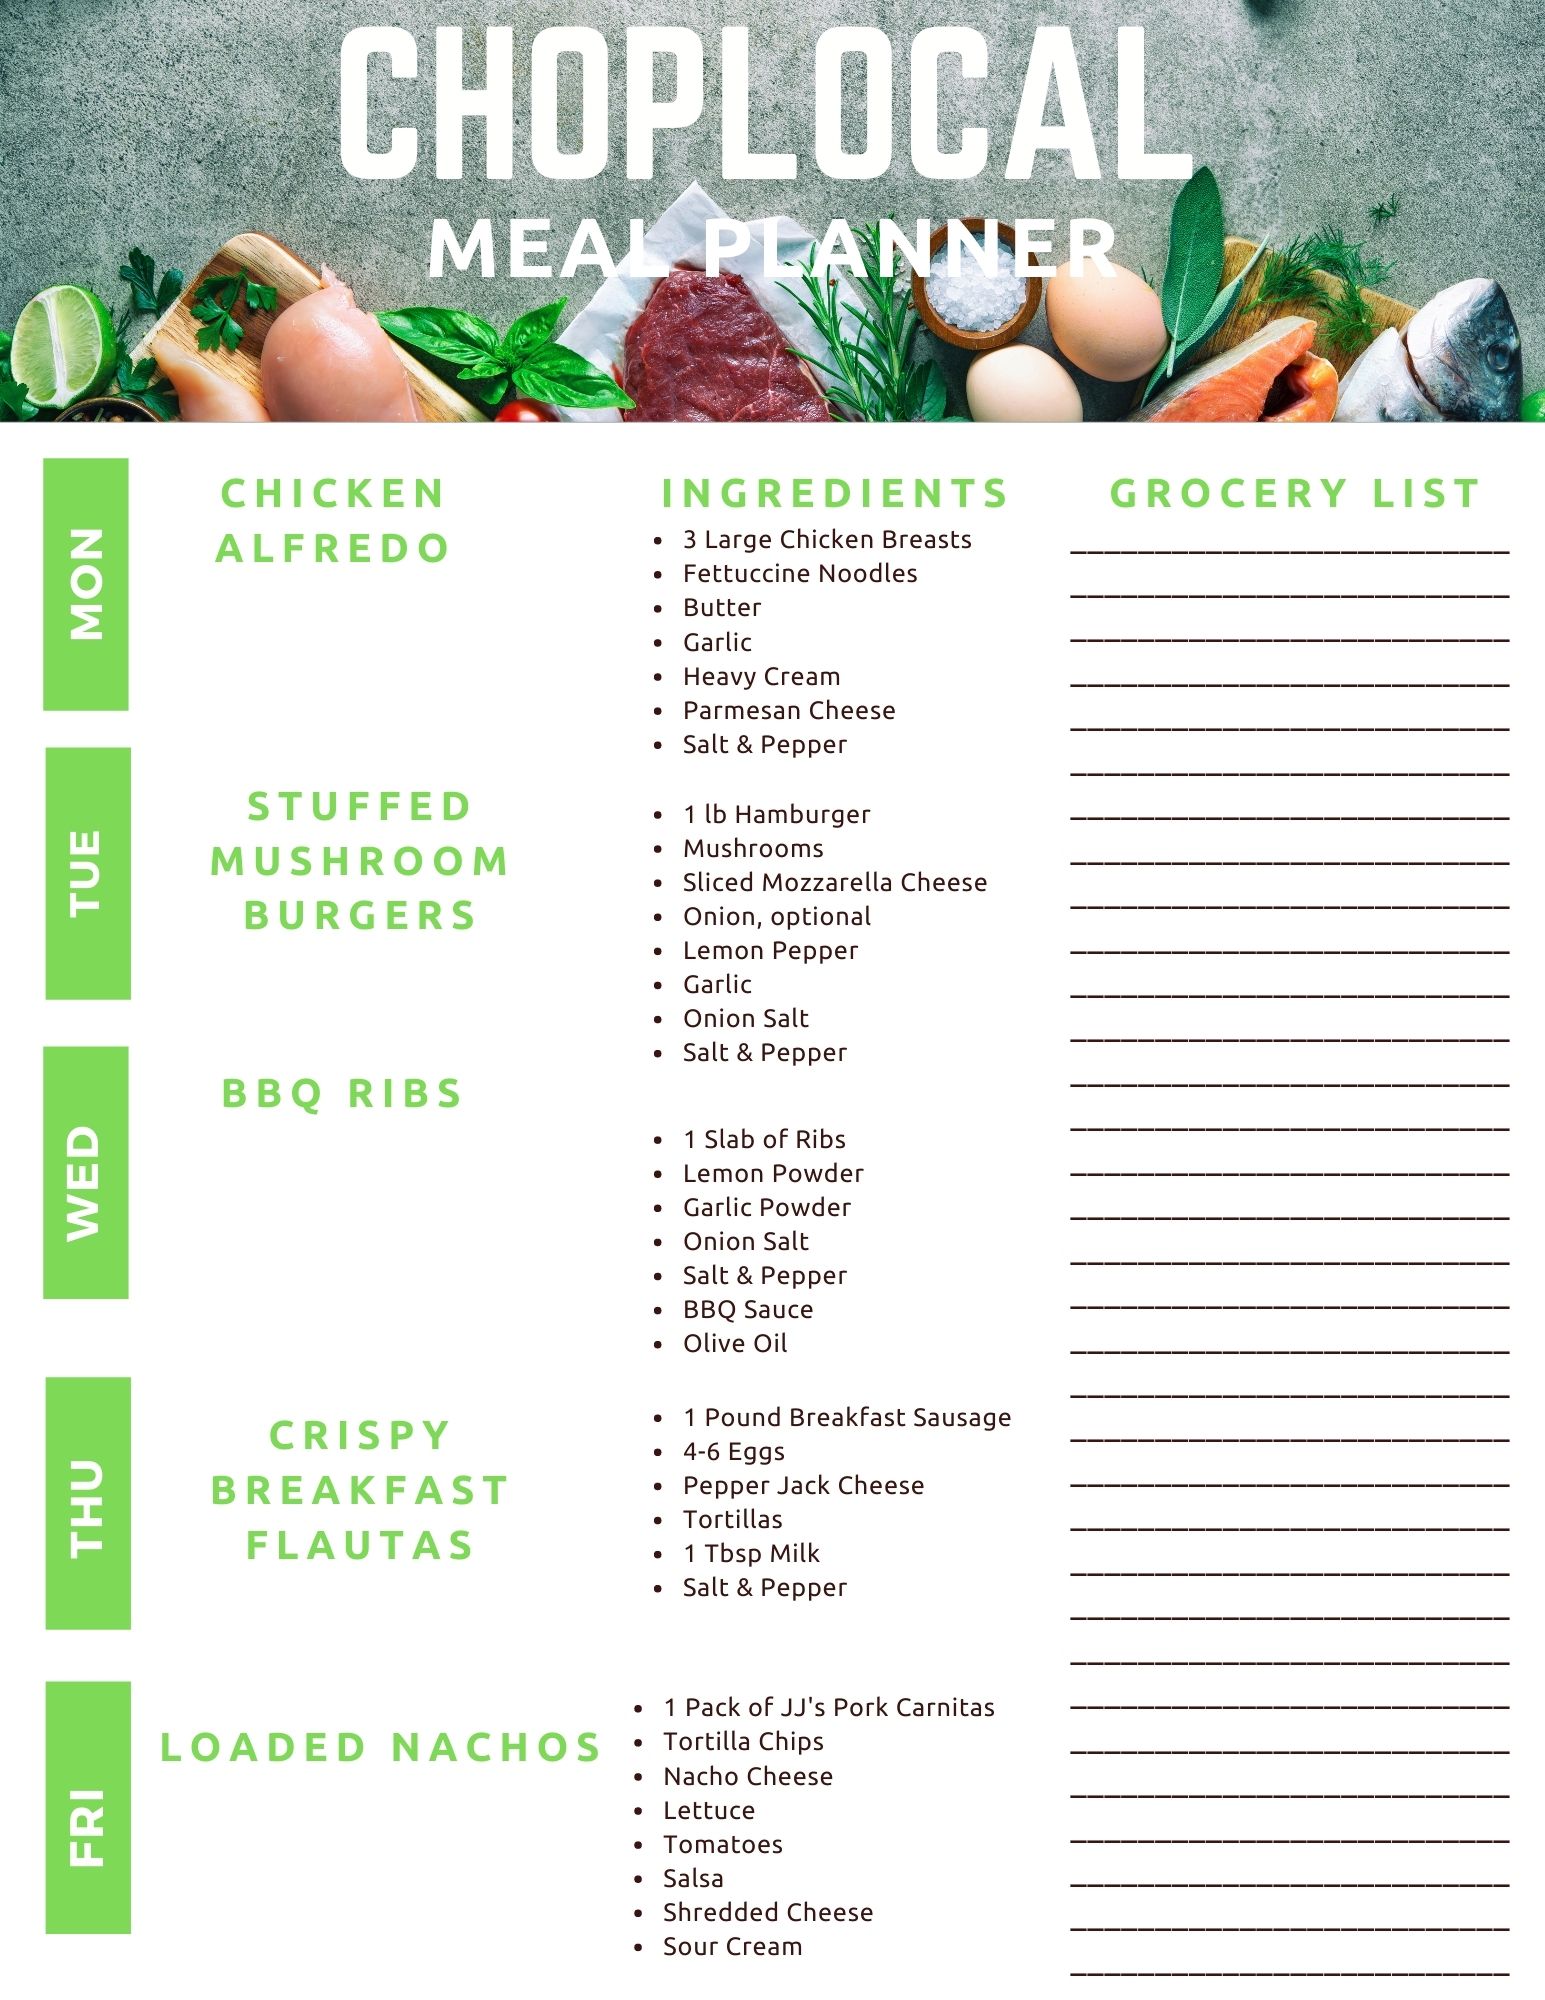 weekly meal plan local meats